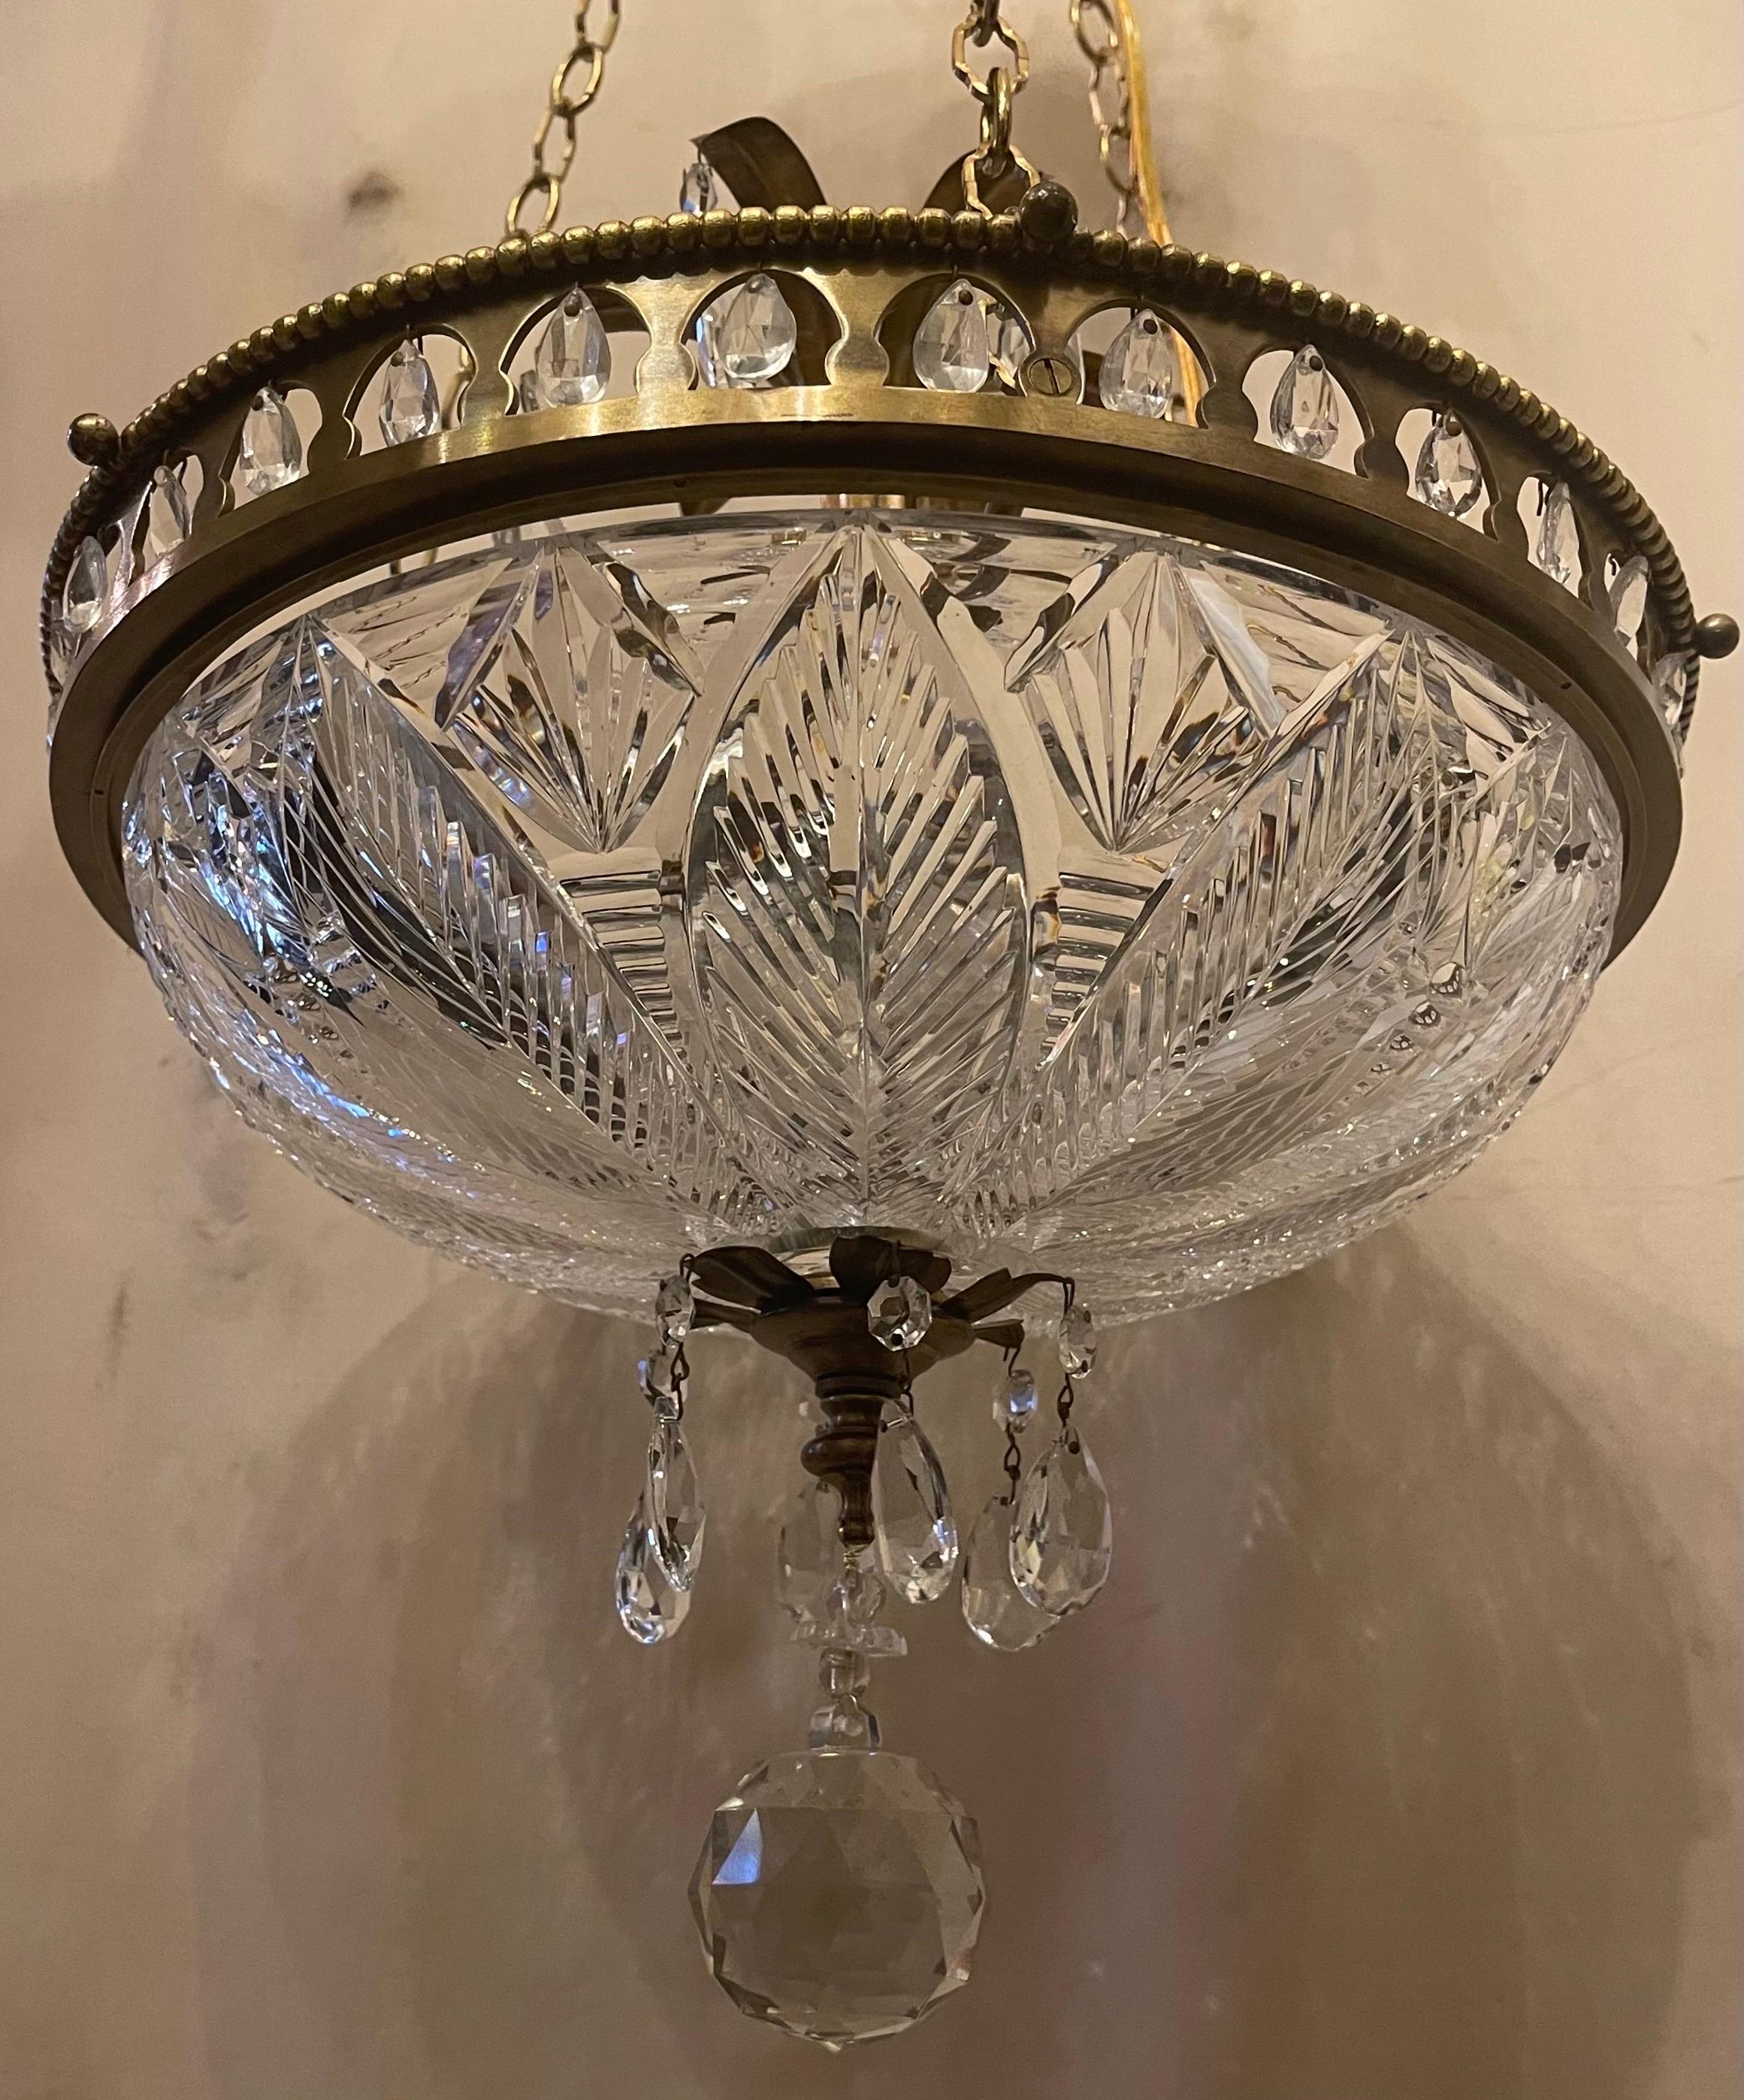 A Wonderful Neoclassical / Regency Faceted And Etched Feather Cut-Crystal Bowl With Dore Bronze Chandelier Having Crystal Drops Throughout, This Ormolu Fixture Has 3 Candelabra Lights Internally.

Height Is Adjustable By Removing Or Adding Of Chain.